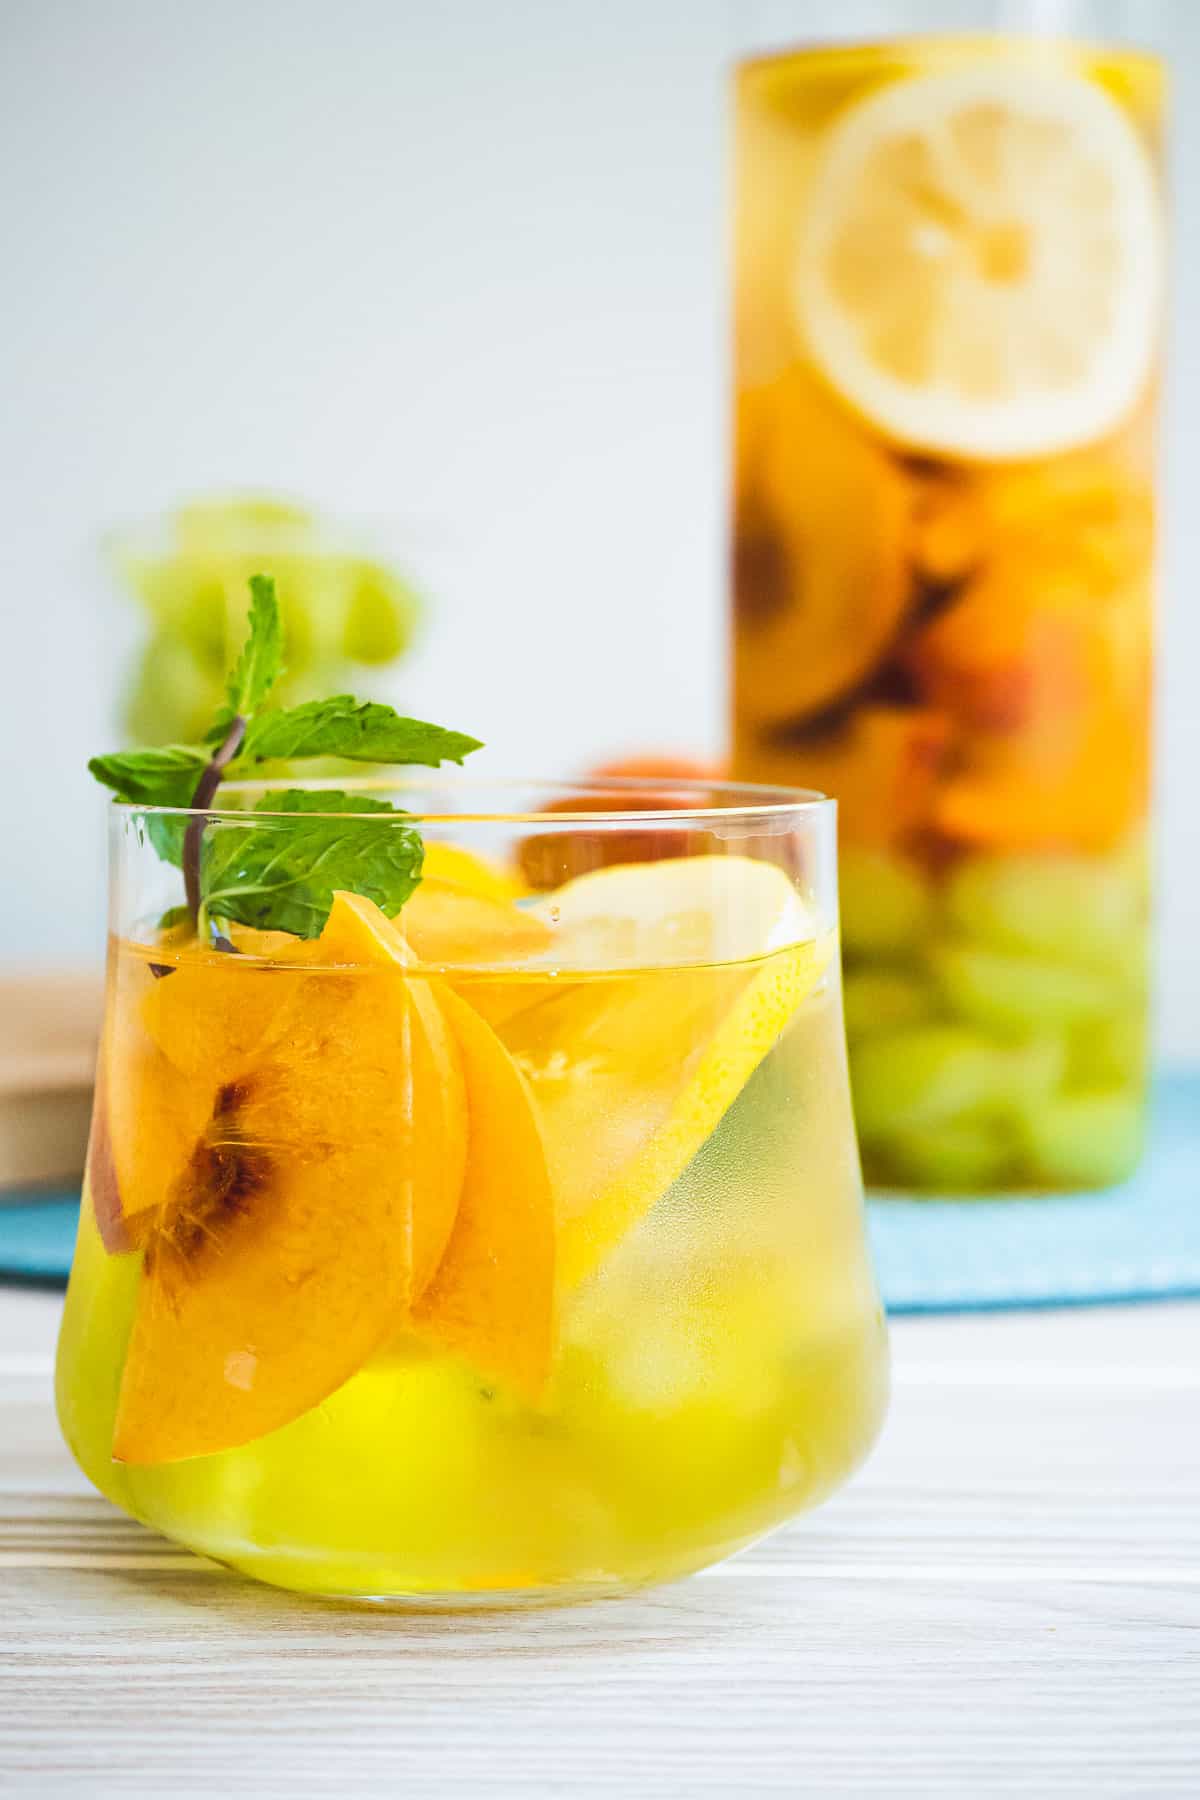 Glass of white wine sangria with sliced yellow peaches, lemon, and a sprig of fresh mint.